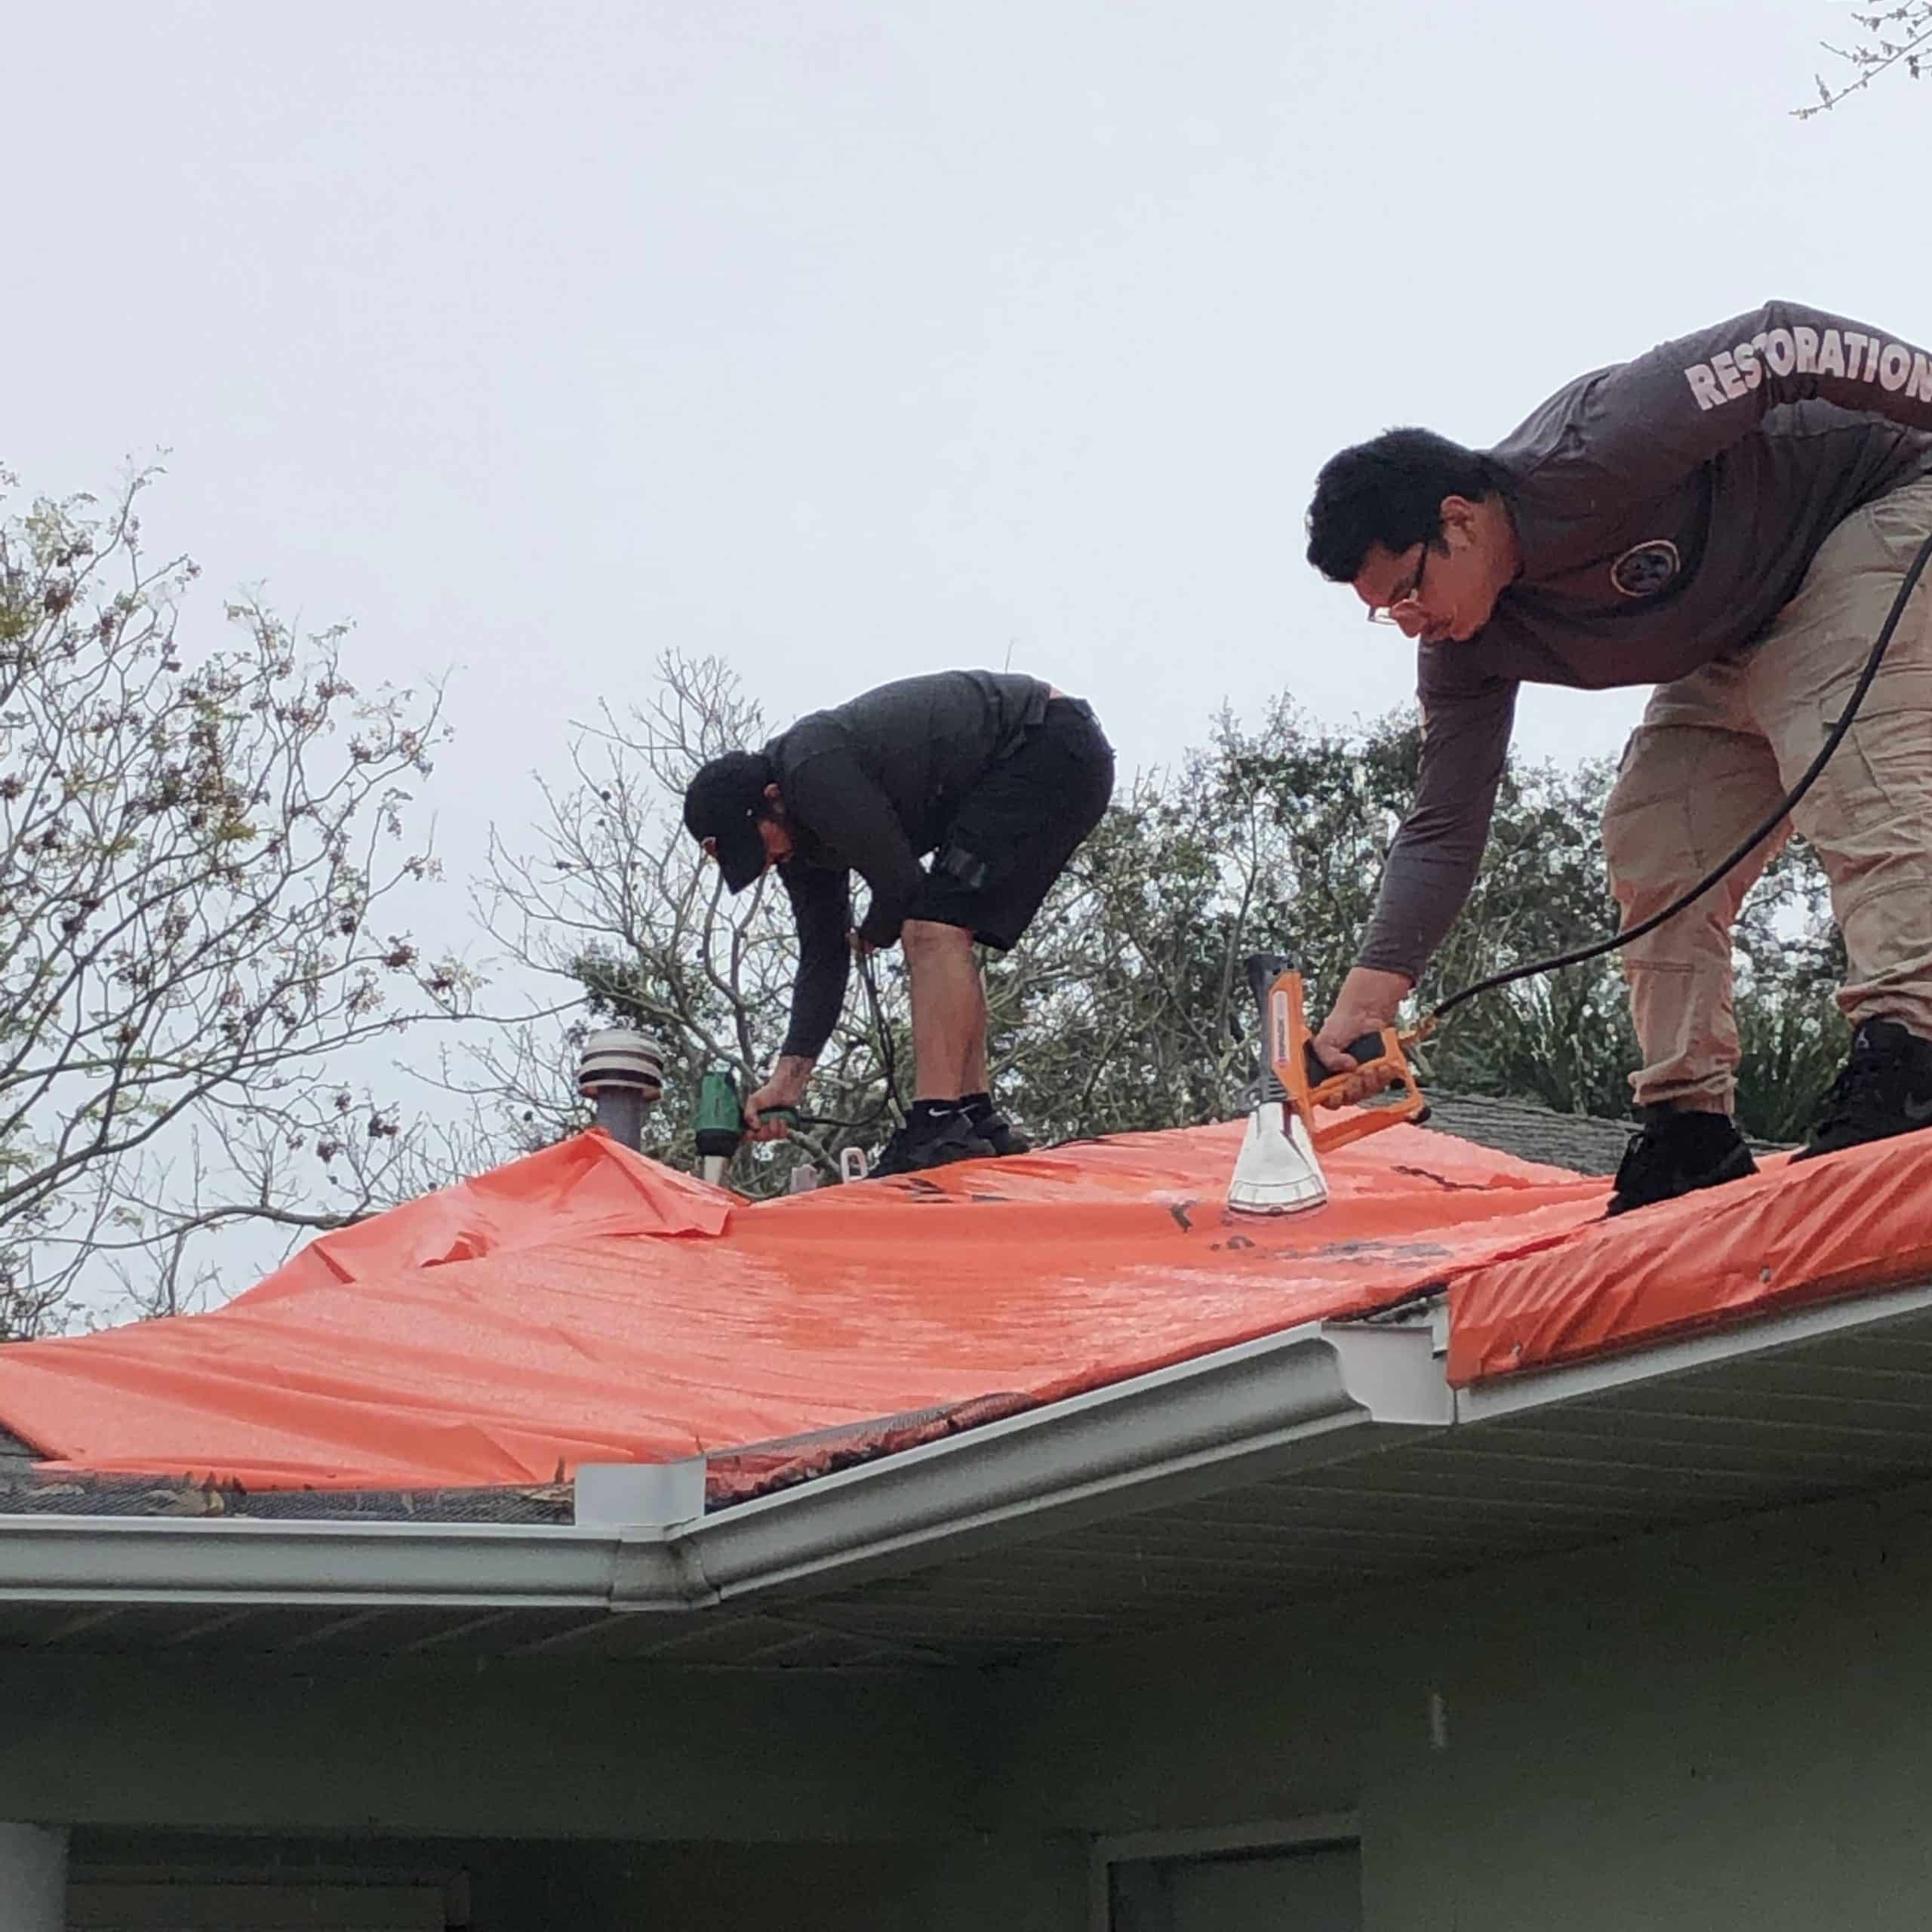 Hurricane Ian Restoration: OTM Offering 24/7 Emergency Services - On The Map Restoration roof tarping to prevent water damage to home in Florida.